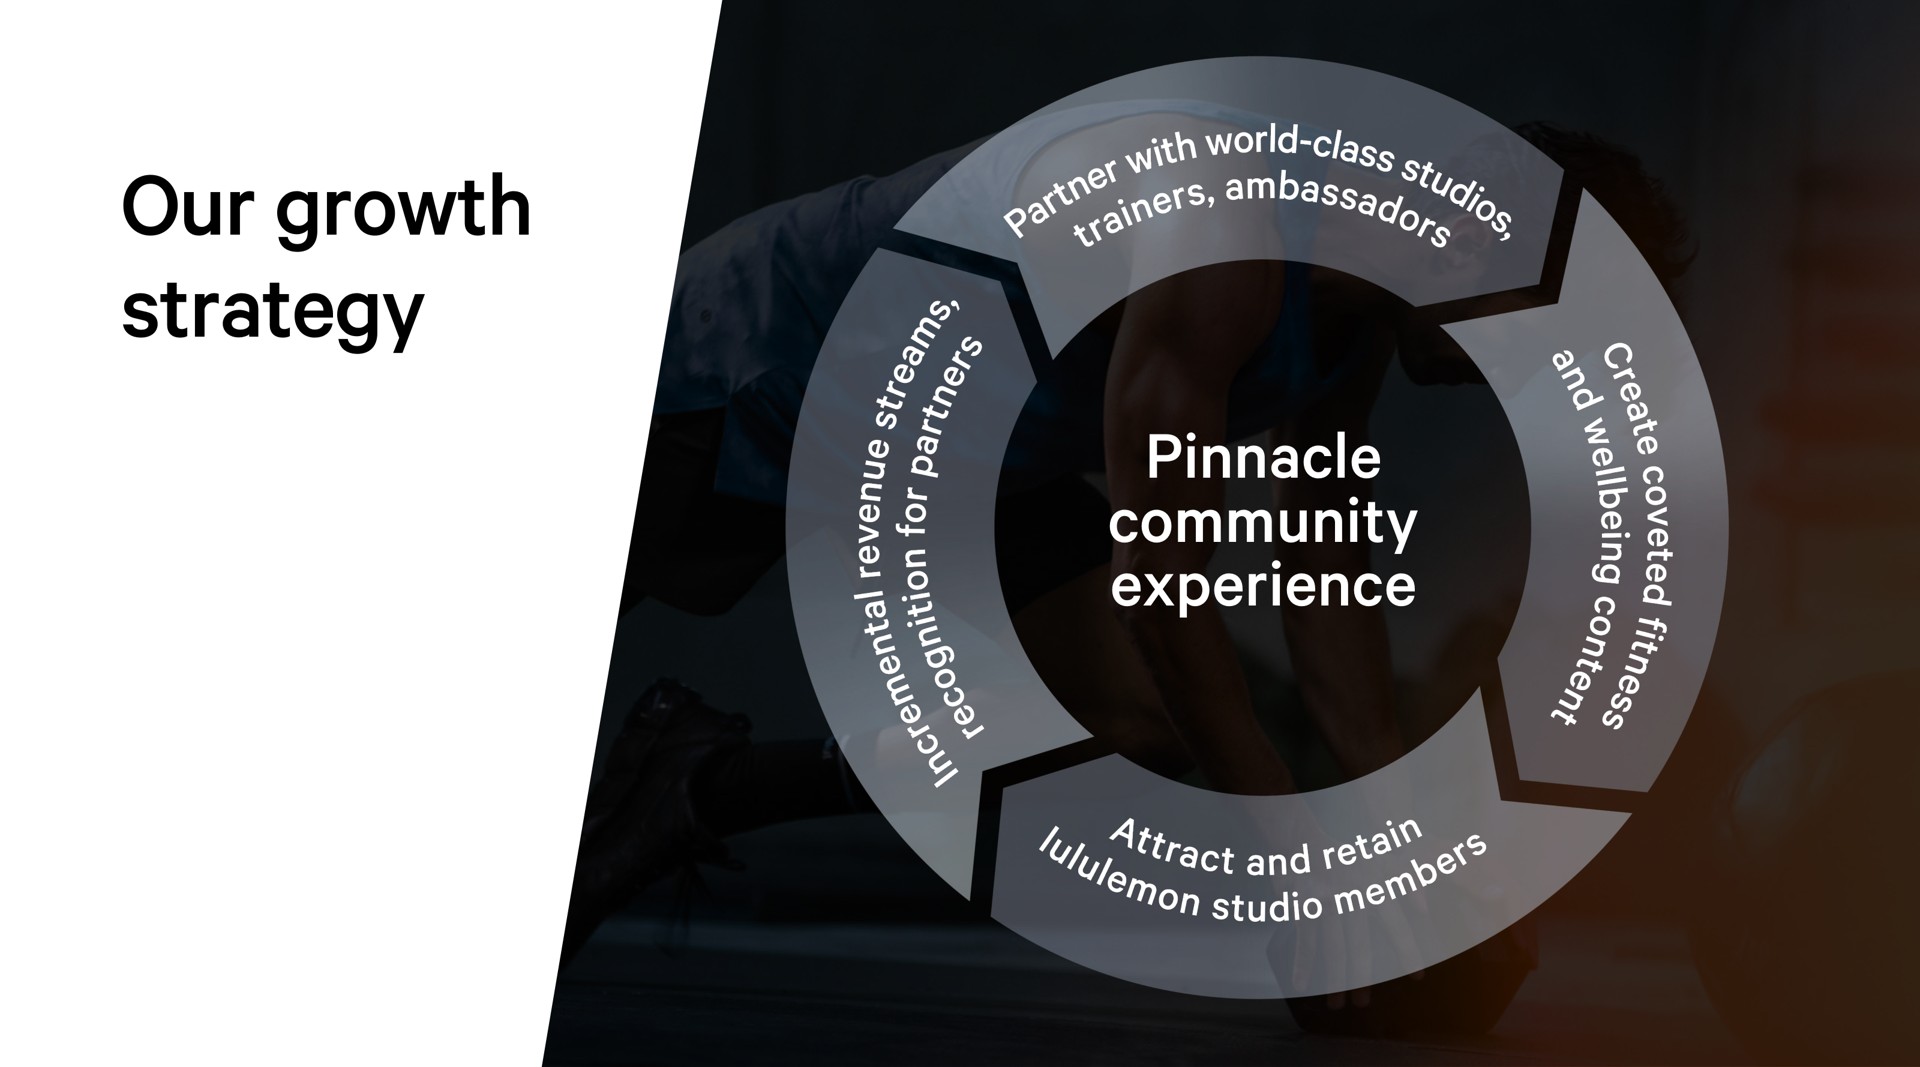 our growth strategy pinnacle community experience a world eon an live as a at ies and studio me | Lululemon